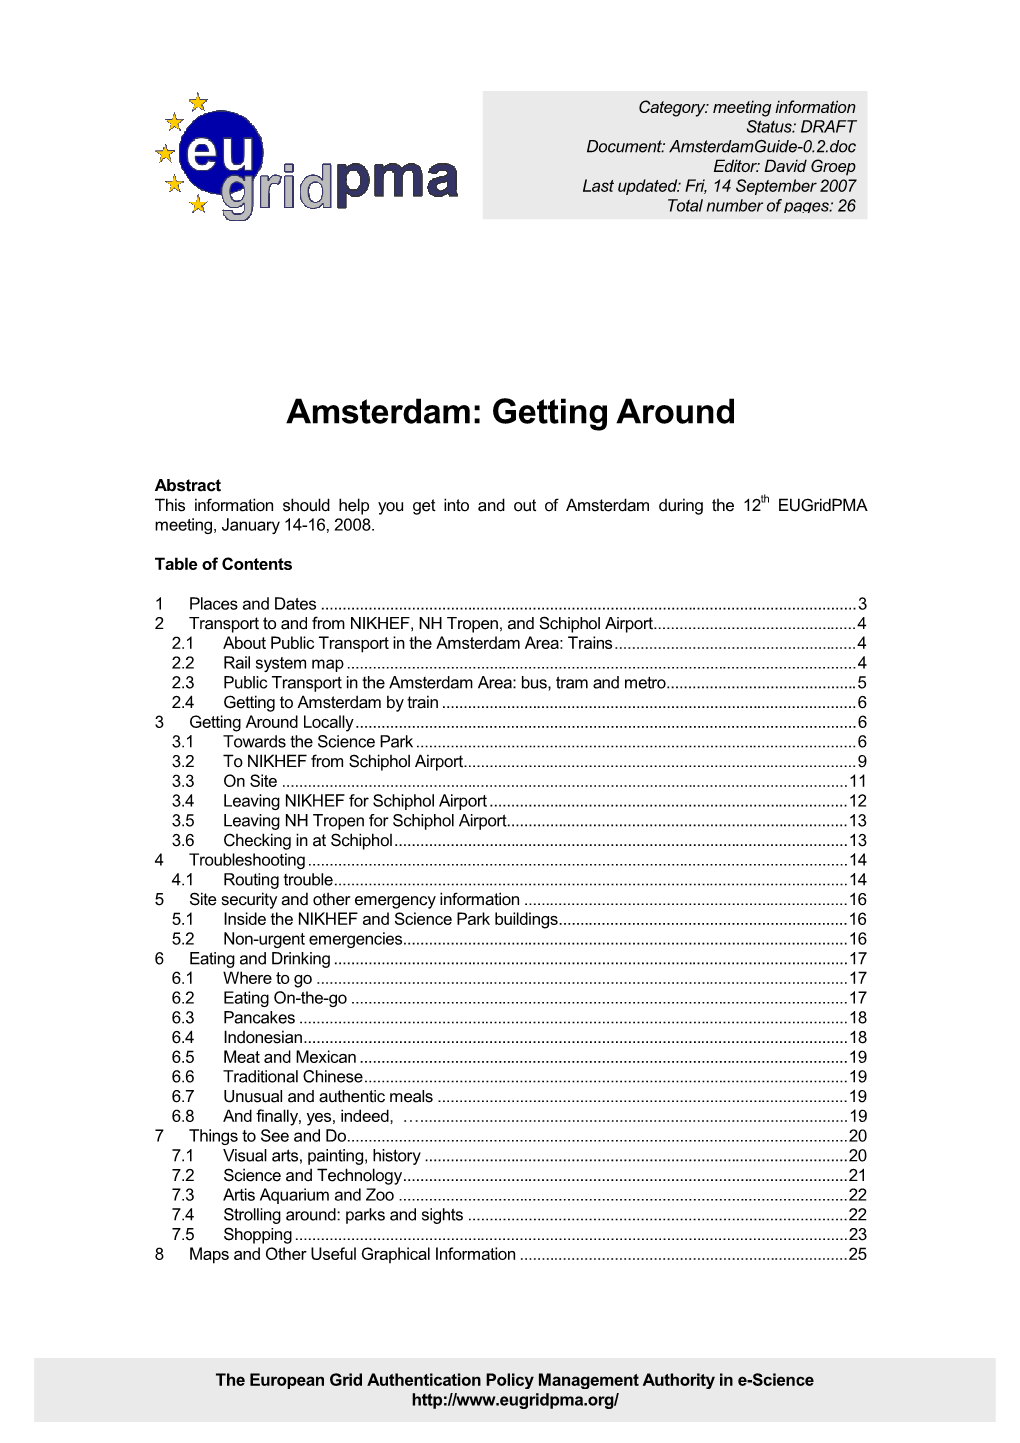 Amsterdamguide-0.2.Doc Editor: David Groep Last Updated: Fri, 14 September 2007 Total Number of Pages: 26